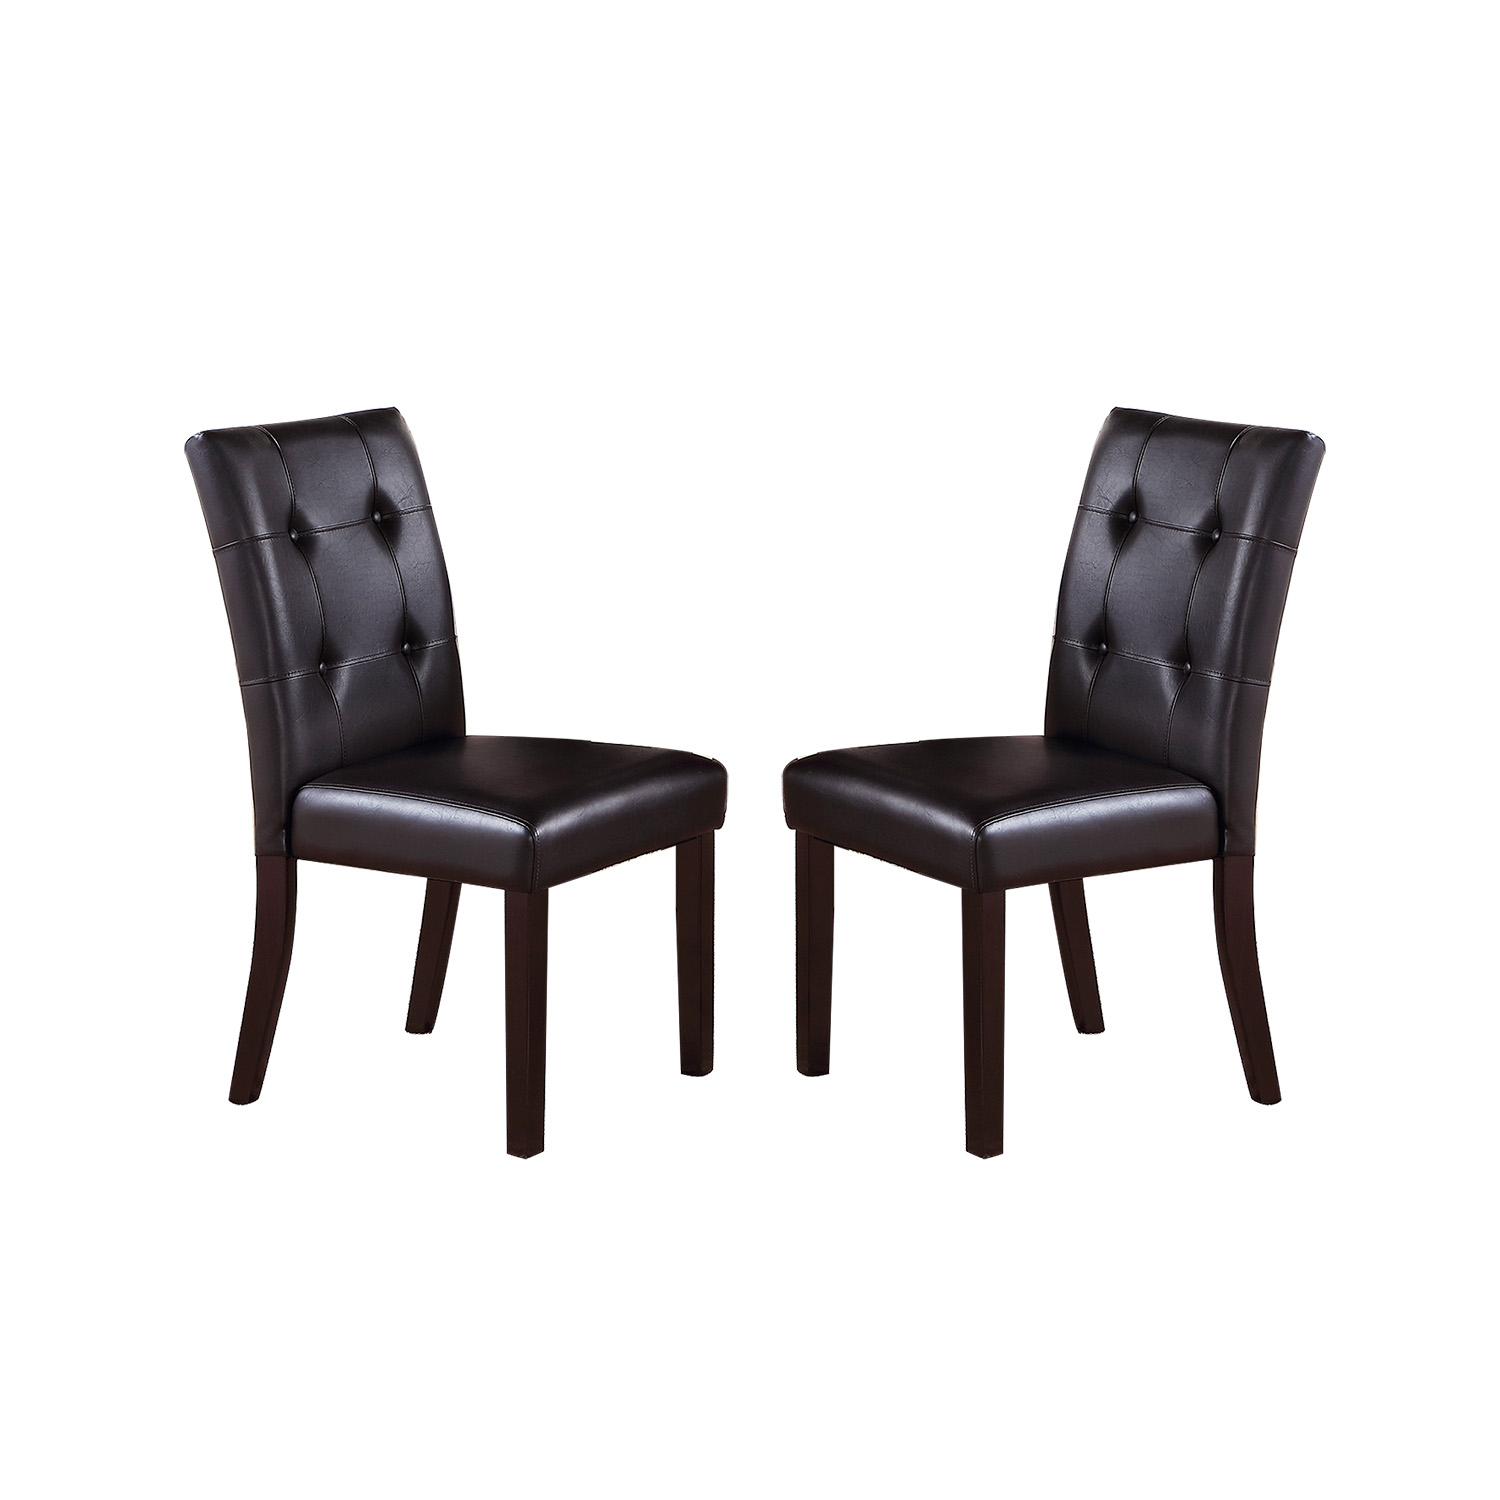 Leroux Upholstered Dining Chairs With Button Tufted, Dark Brown(Set of 2)-CASAINC